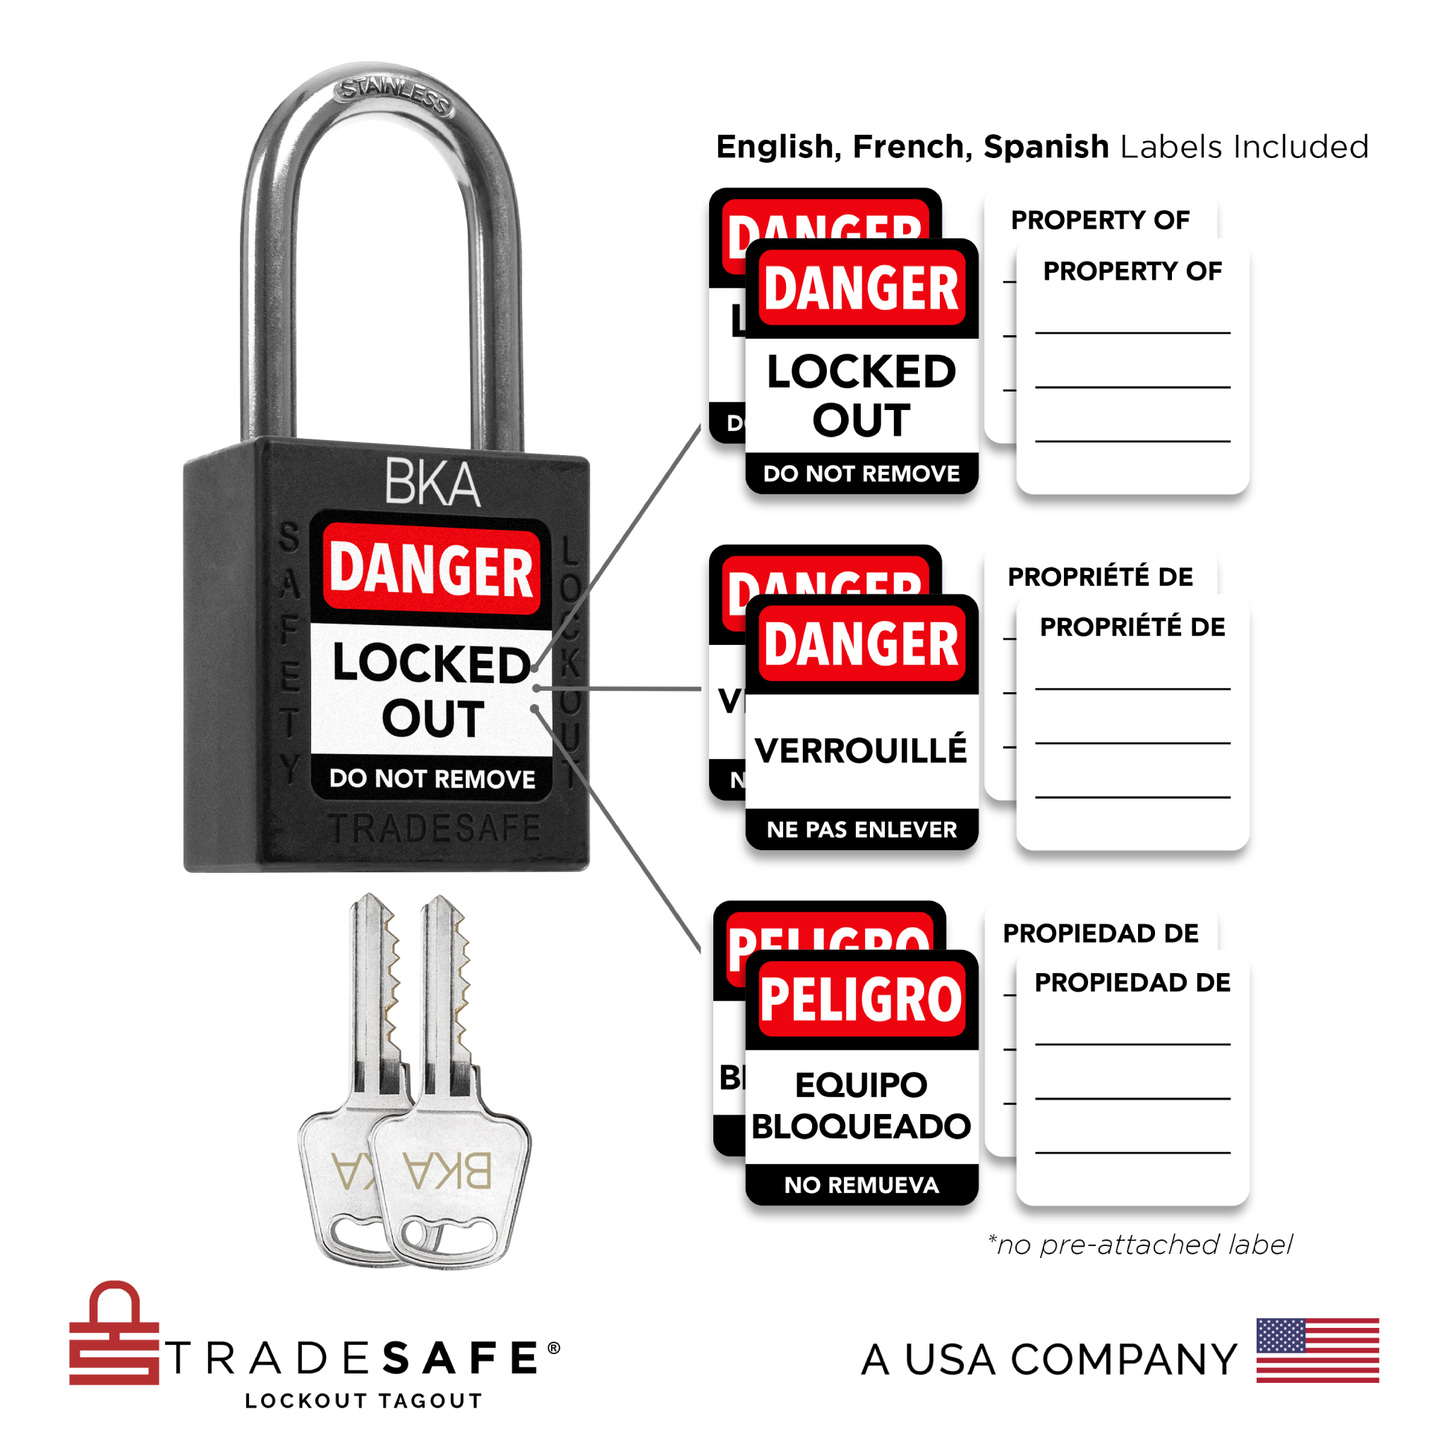 infographic of black keyed alike unlimited loto locks with 6 sets of padlock labels in english, spanish, and french languages